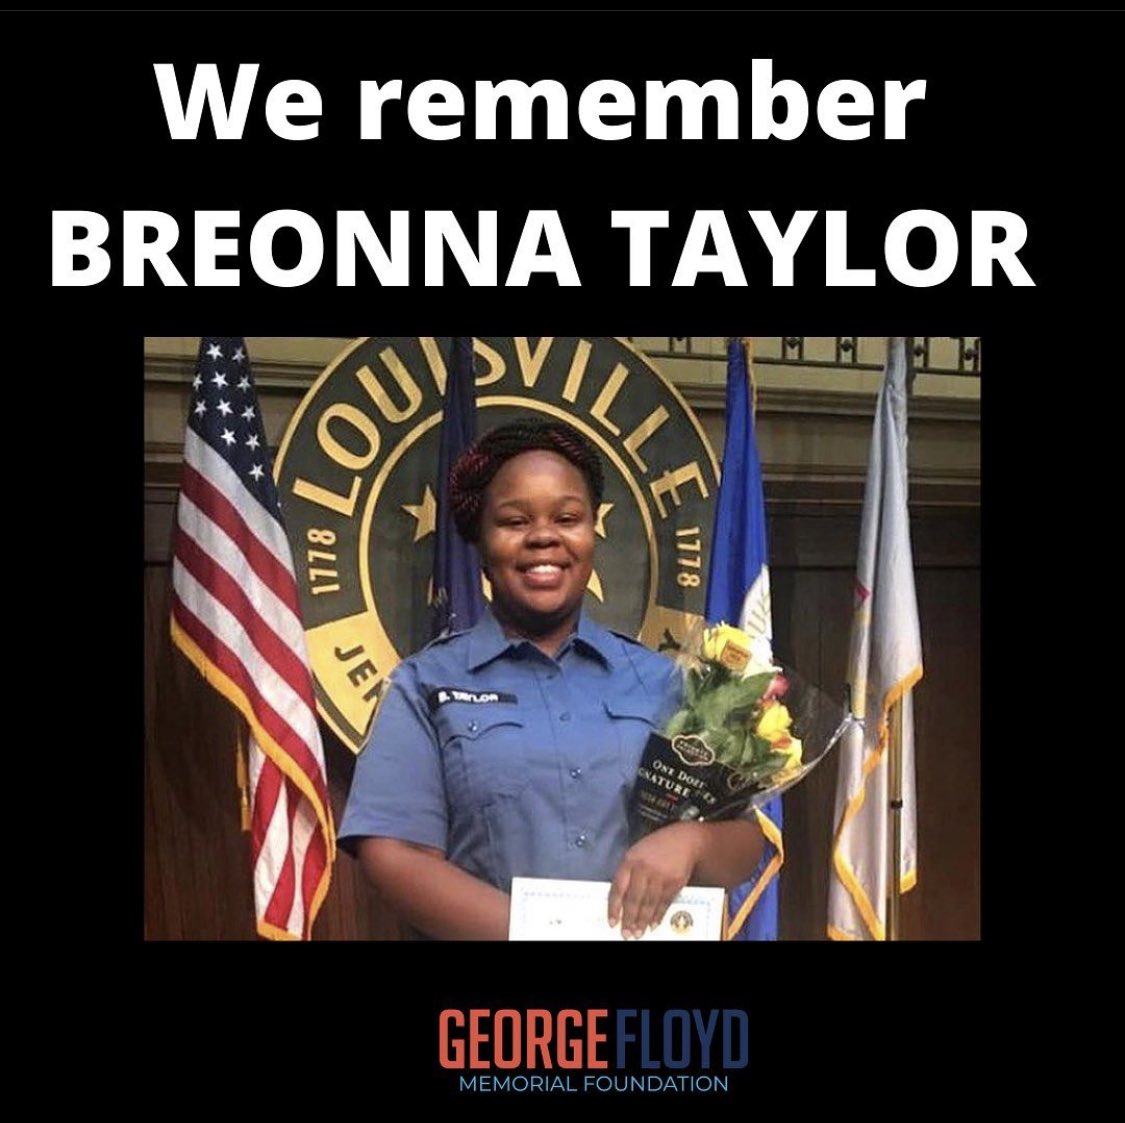 TWO years ago #BreonnaTaylor was MURDERED by crooked cops who raided her home. The raid was compromised by POOR planning and RECKLESS execution. Breonna Taylor should STILL BE ALIVE! We must DEMAND #JusticeForBreonnaTaylor #SayHerName